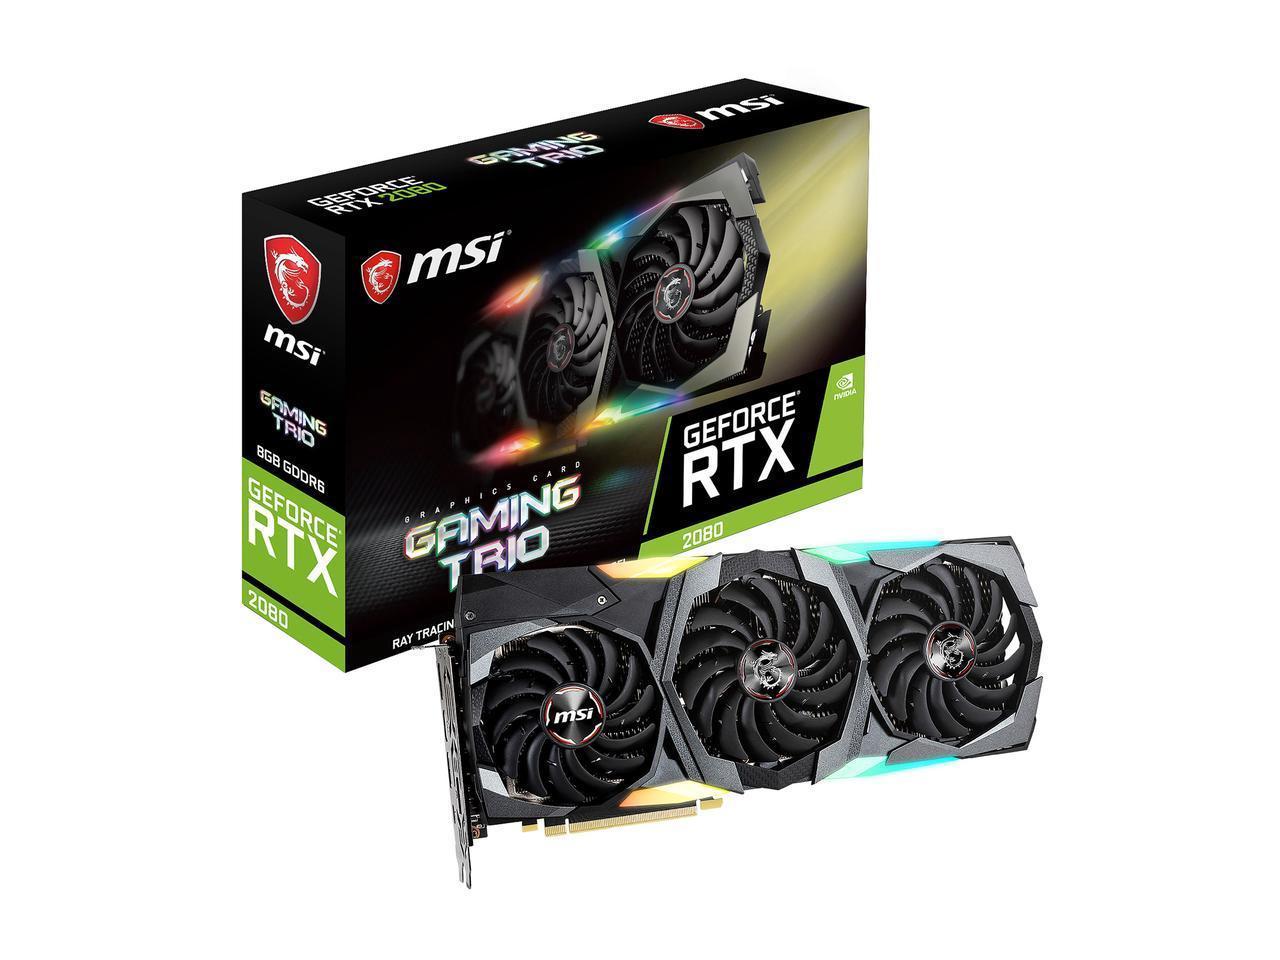 MSI GeForce RTX 2080 Gaming X Trio Graphics Card - image 1 of 3